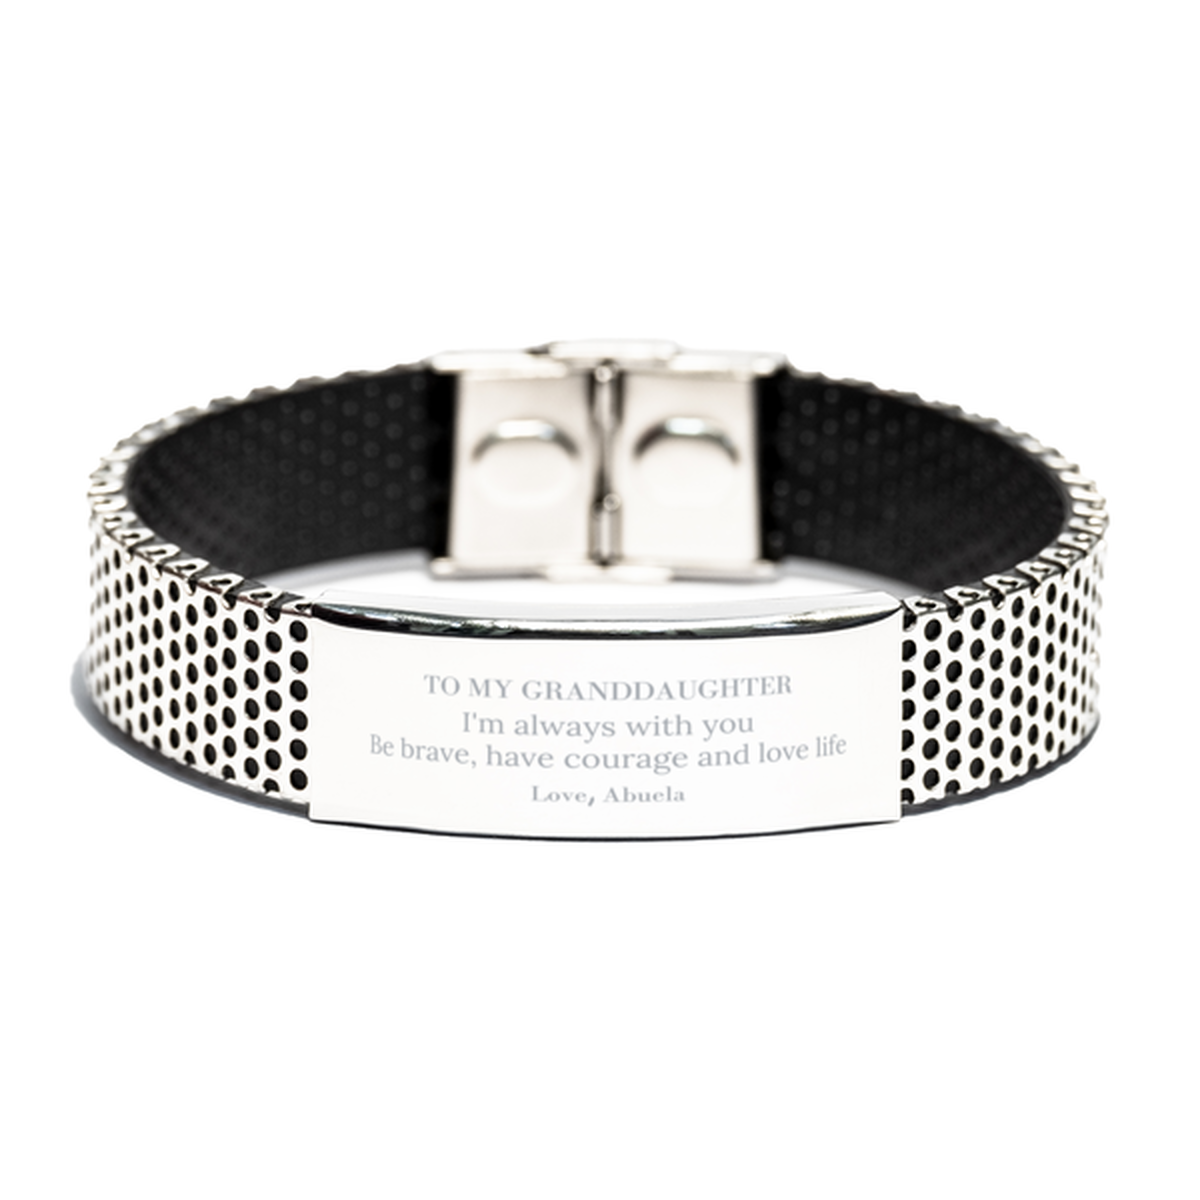 To My Granddaughter Gifts from Abuela, Unique Stainless Steel Bracelet Inspirational Christmas Birthday Graduation Gifts for Granddaughter I'm always with you. Be brave, have courage and love life. Love, Abuela